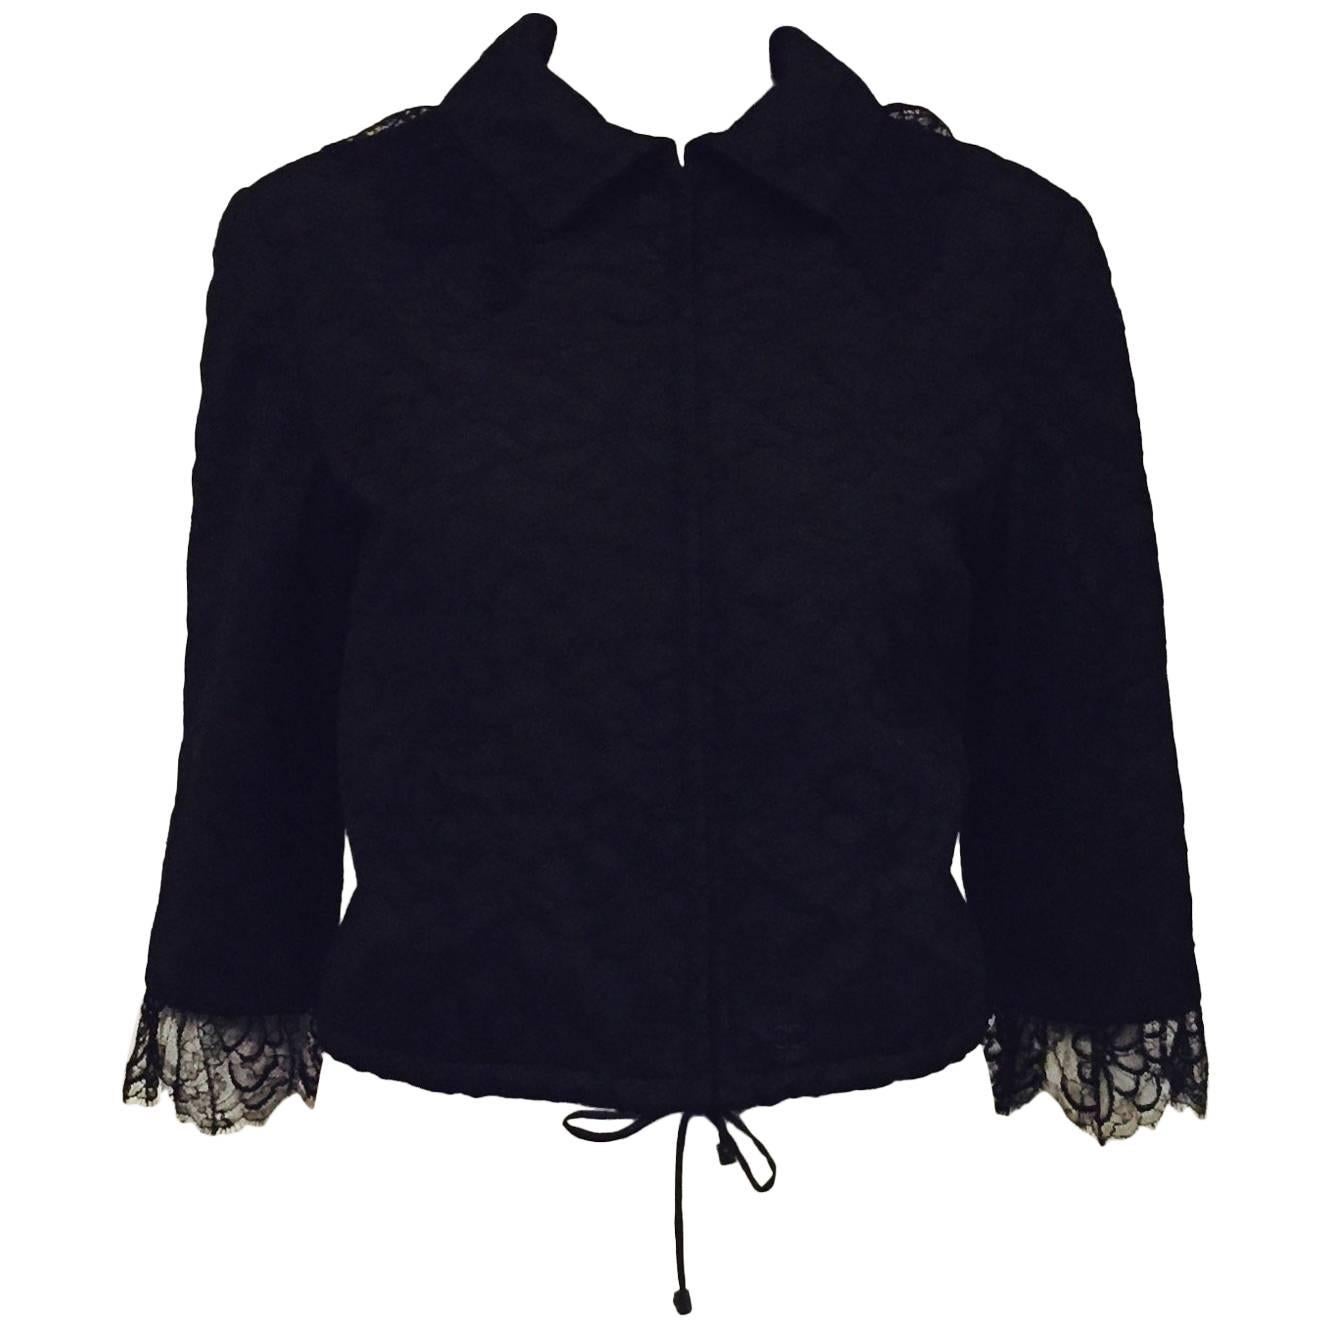 Chanel Camellia Flower Black Lace & Silk Cropped Jacket with Drawstring Tie